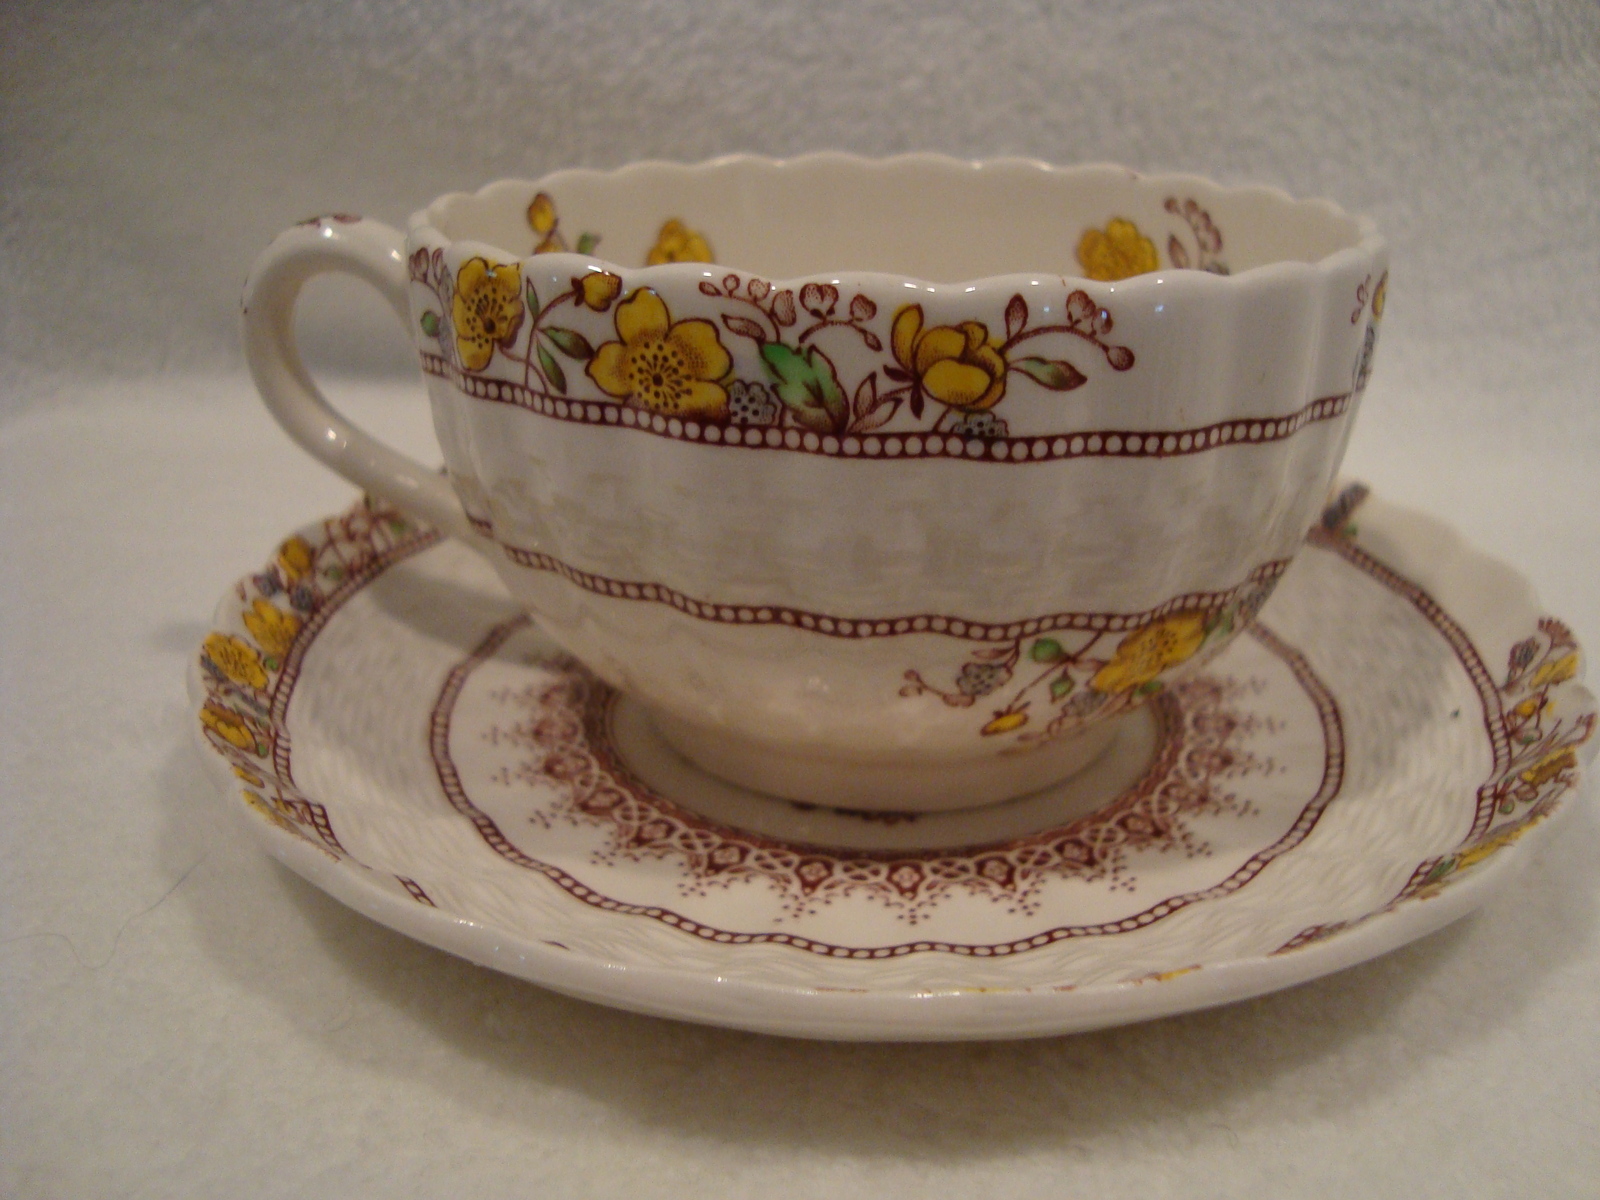 Copeland Spode white porcelain tea cup and saucer in the buttercup pattern. - $25.00